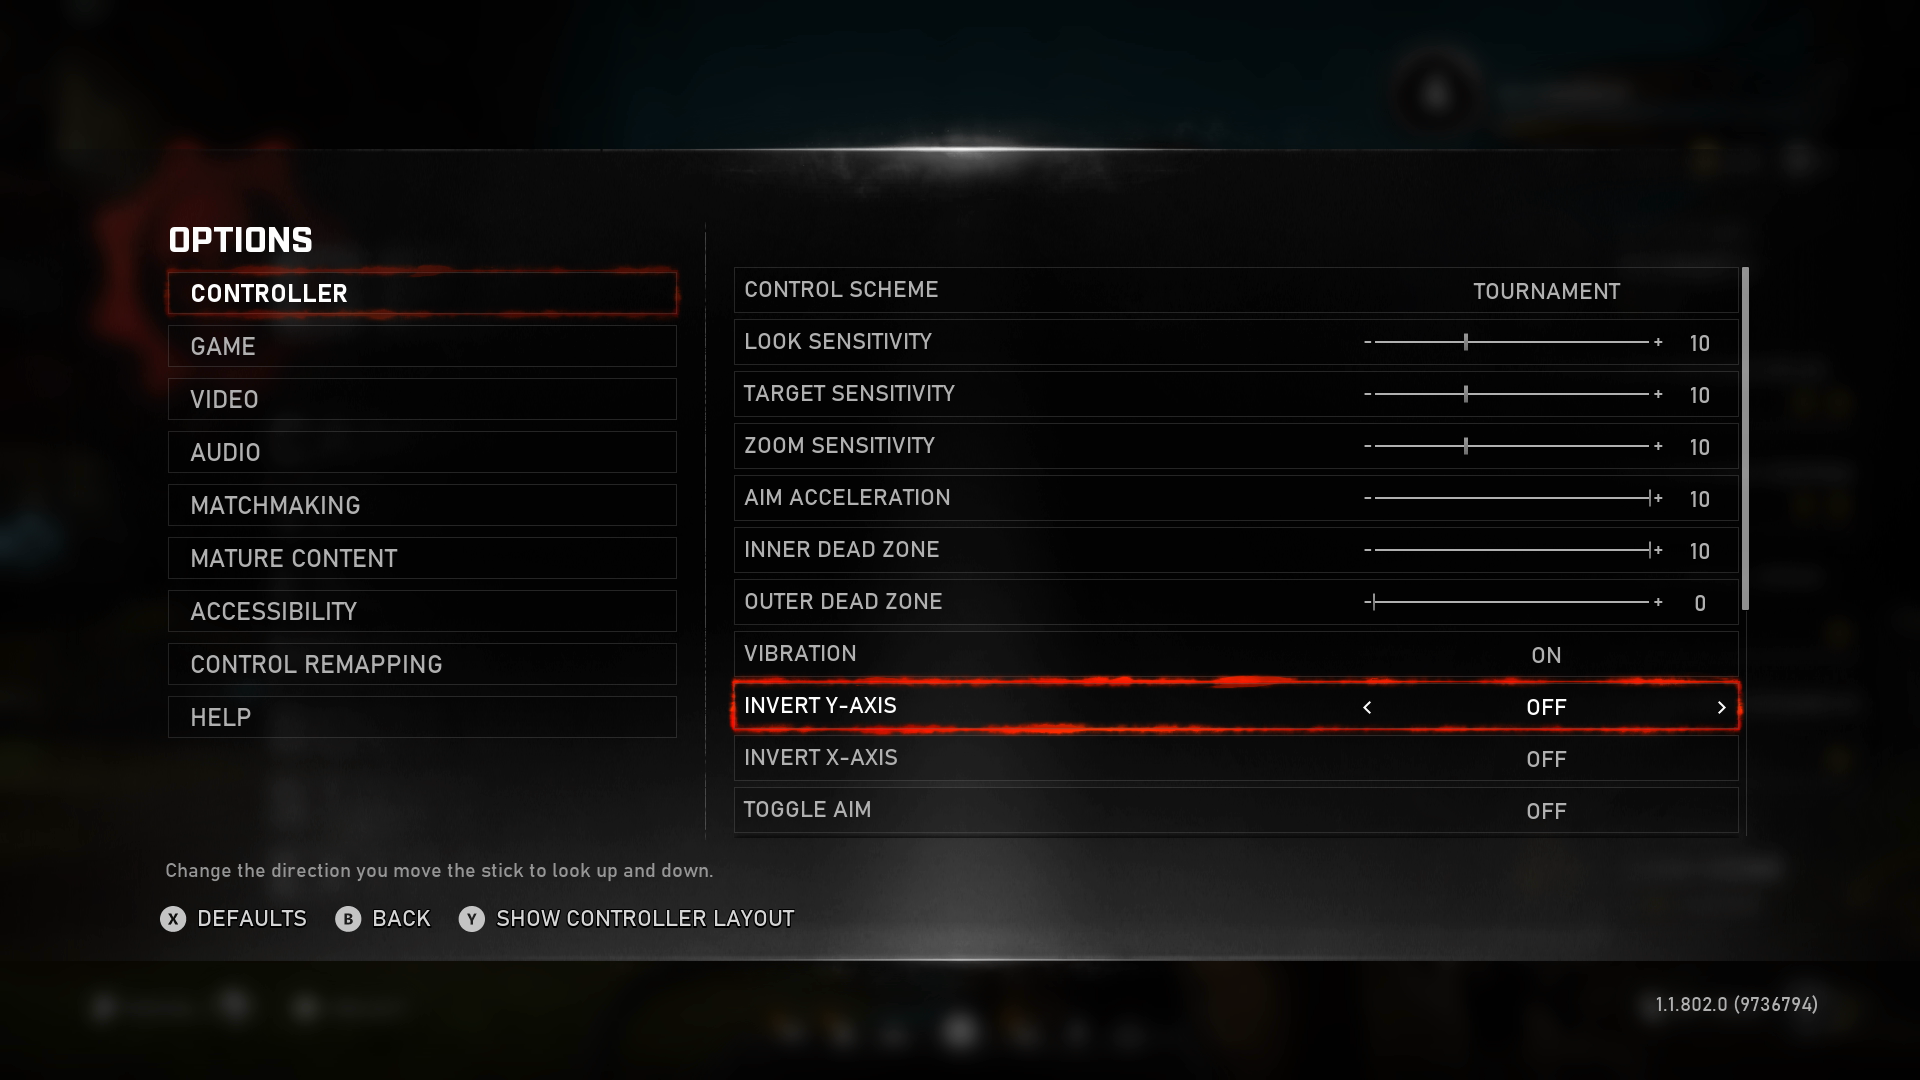 The controller options menu in Gears 5. The player is focused on the "invert y-axis" option. The current value is "off".